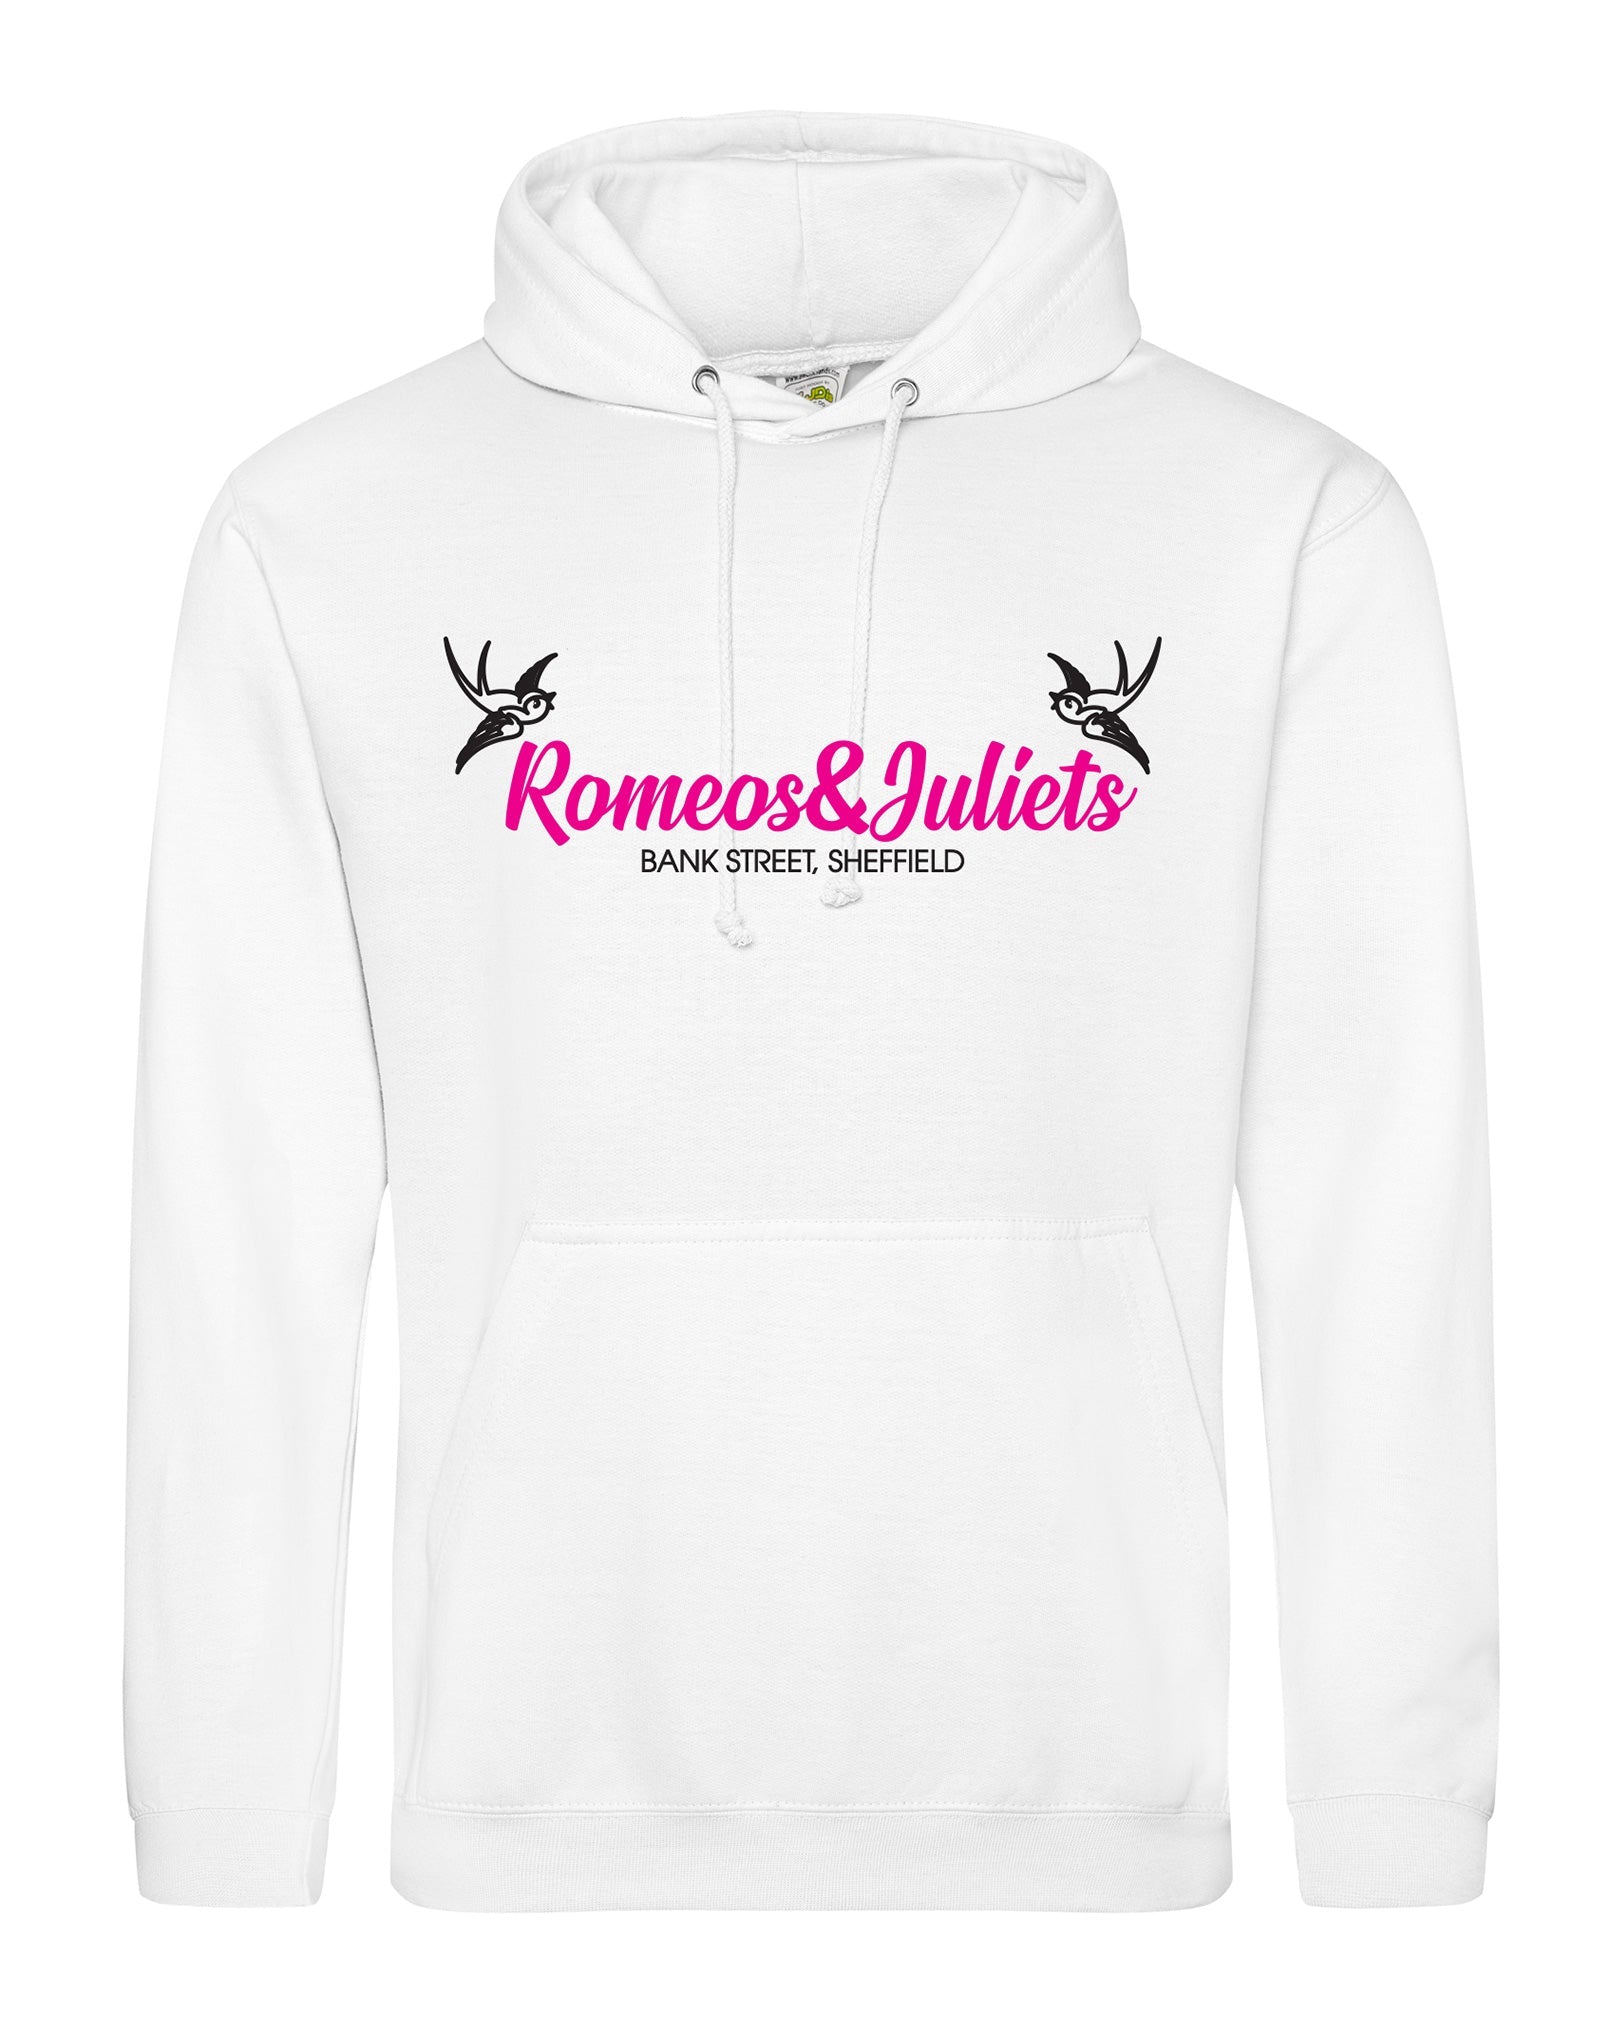 Romeos & Juliets unisex fit hoodie - various colours - Dirty Stop Outs